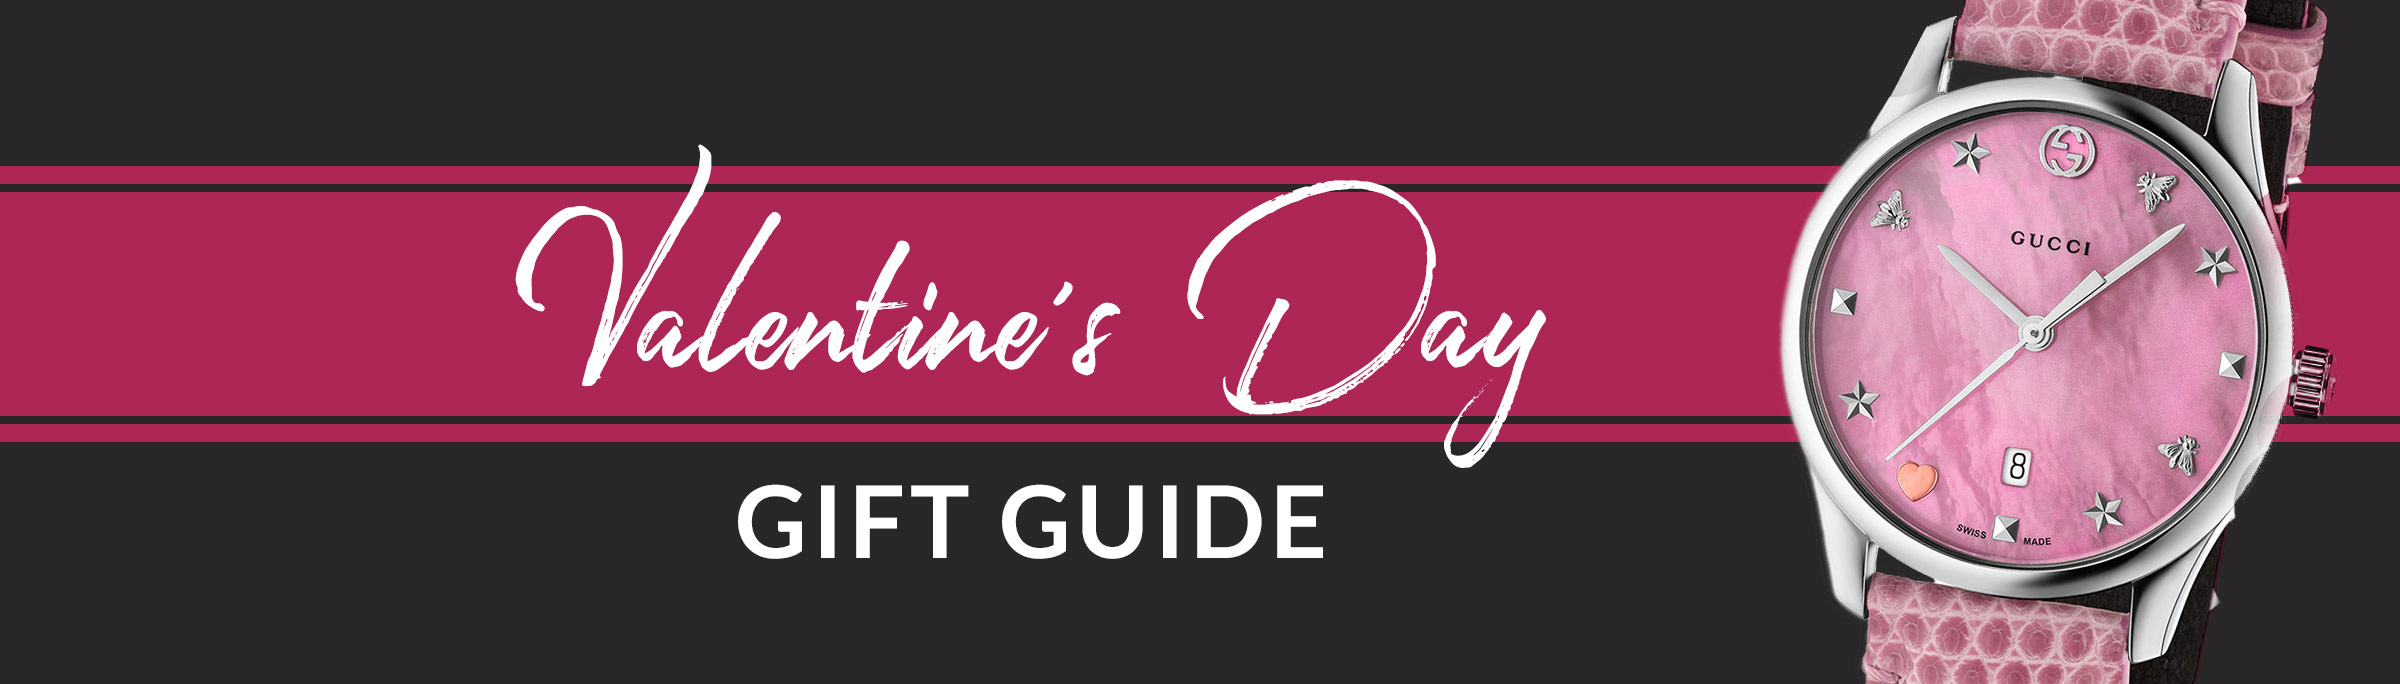 Valentine's Day Gift Guide Banner